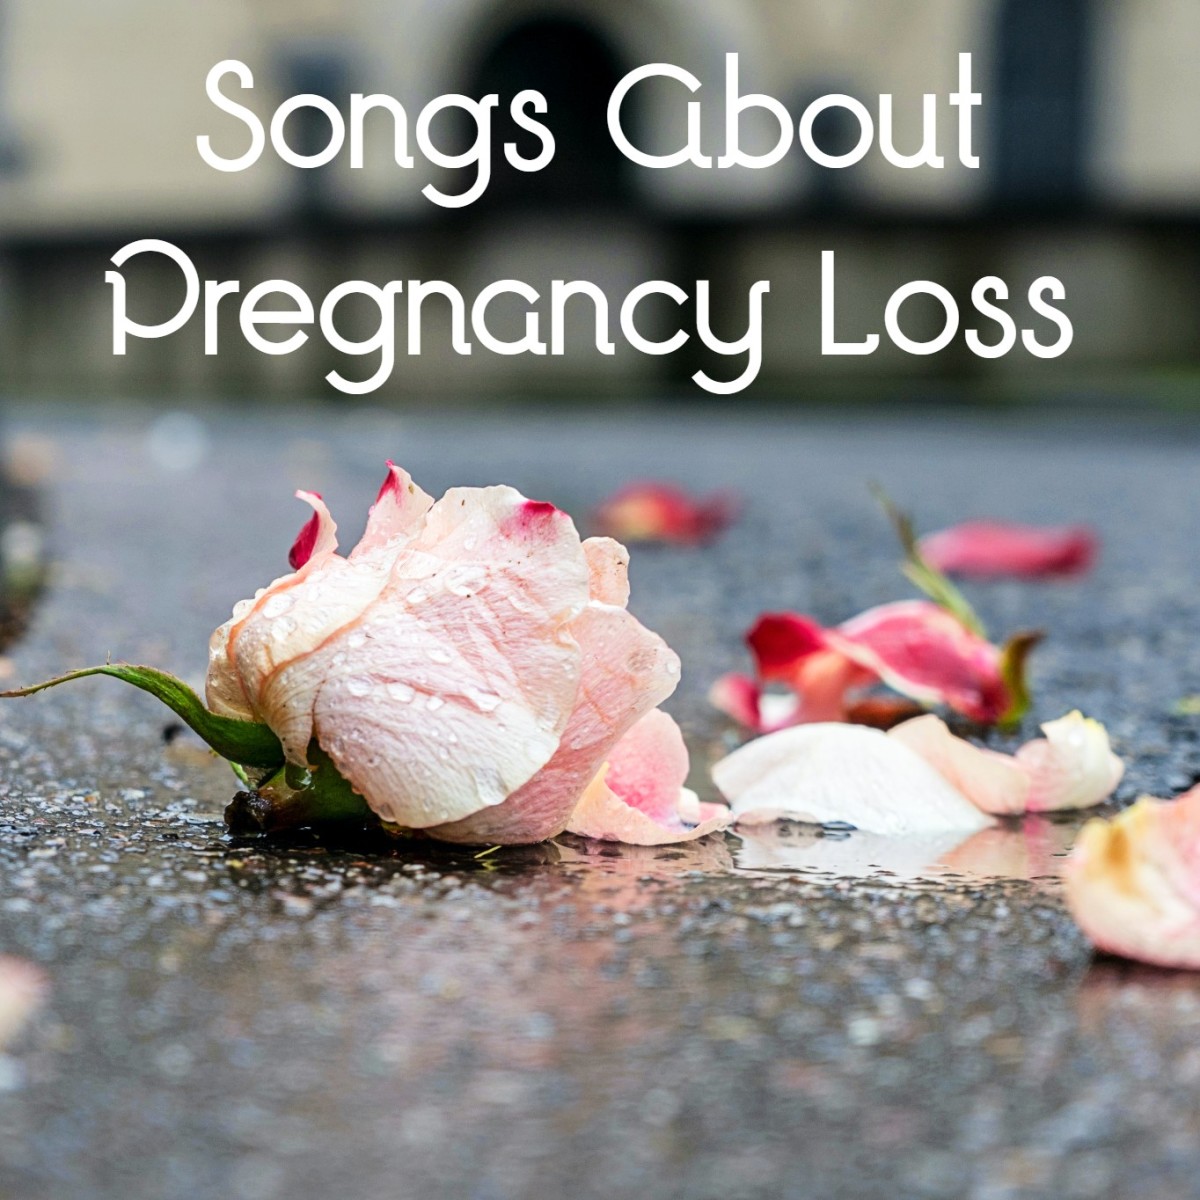 46 Songs About Pregnancy Loss